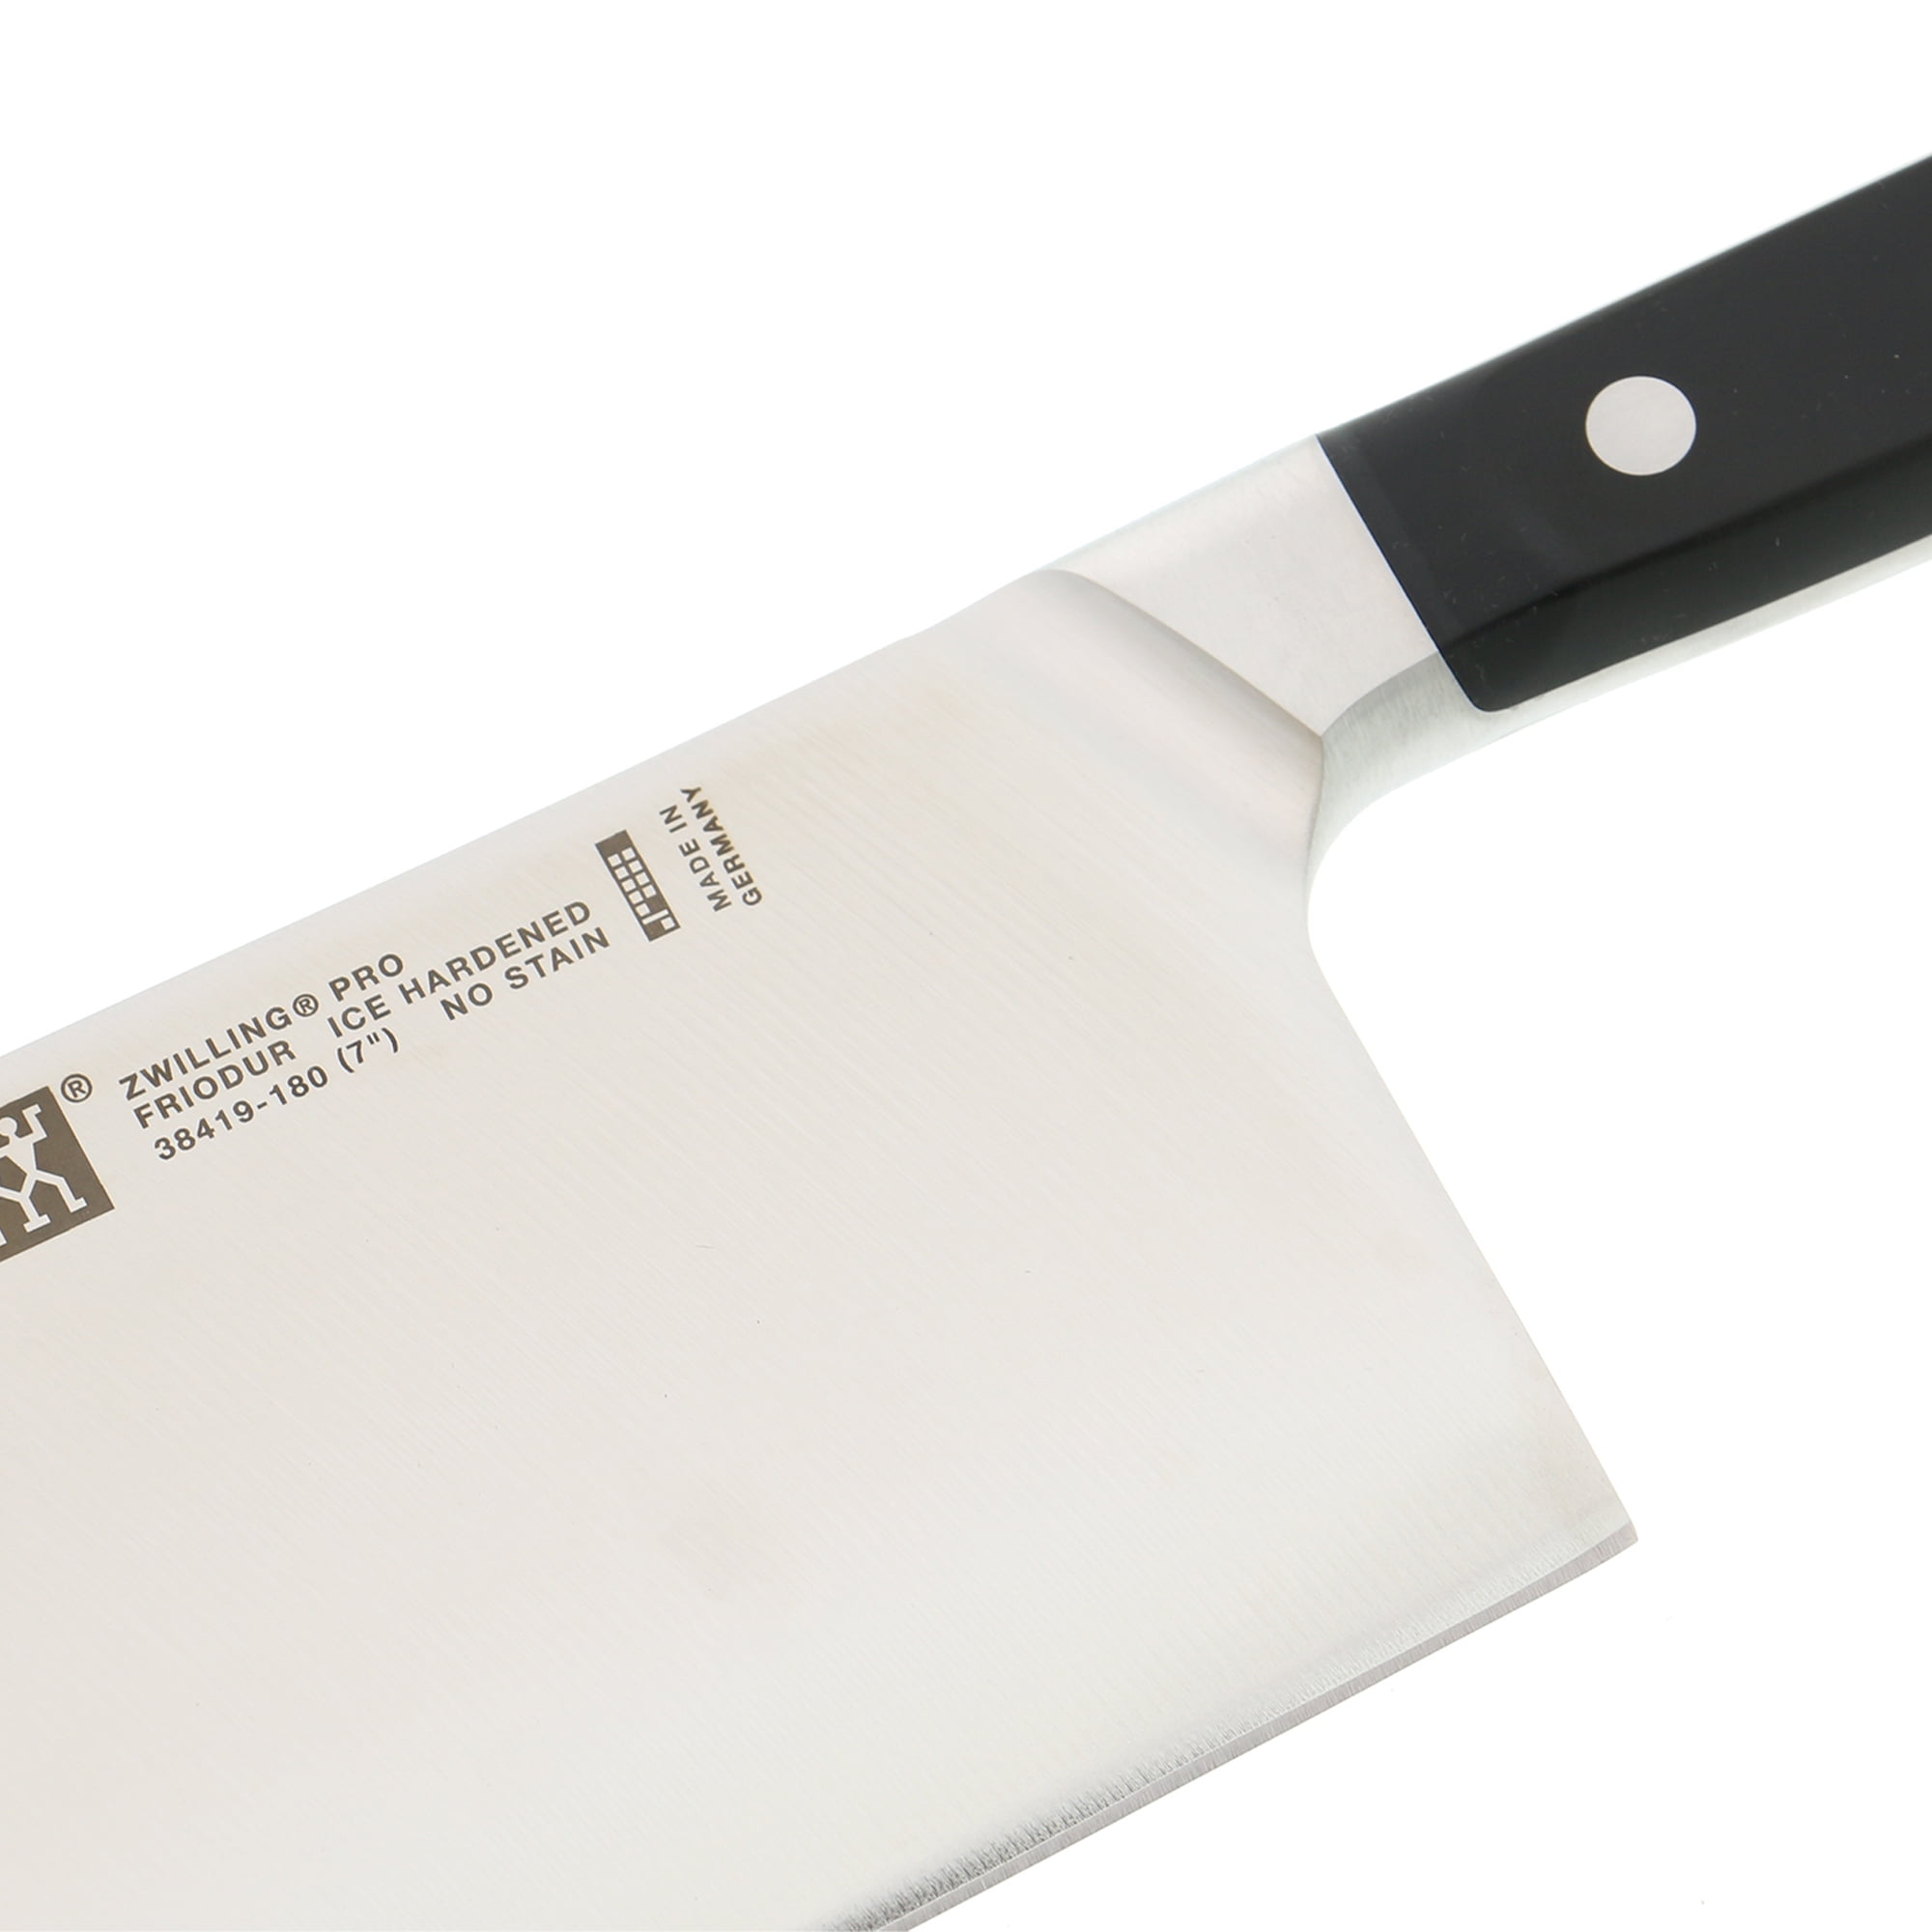 3-Layer Forged Vegetable Cleaver 7-inch, TPR – ZHEN Premium Knife